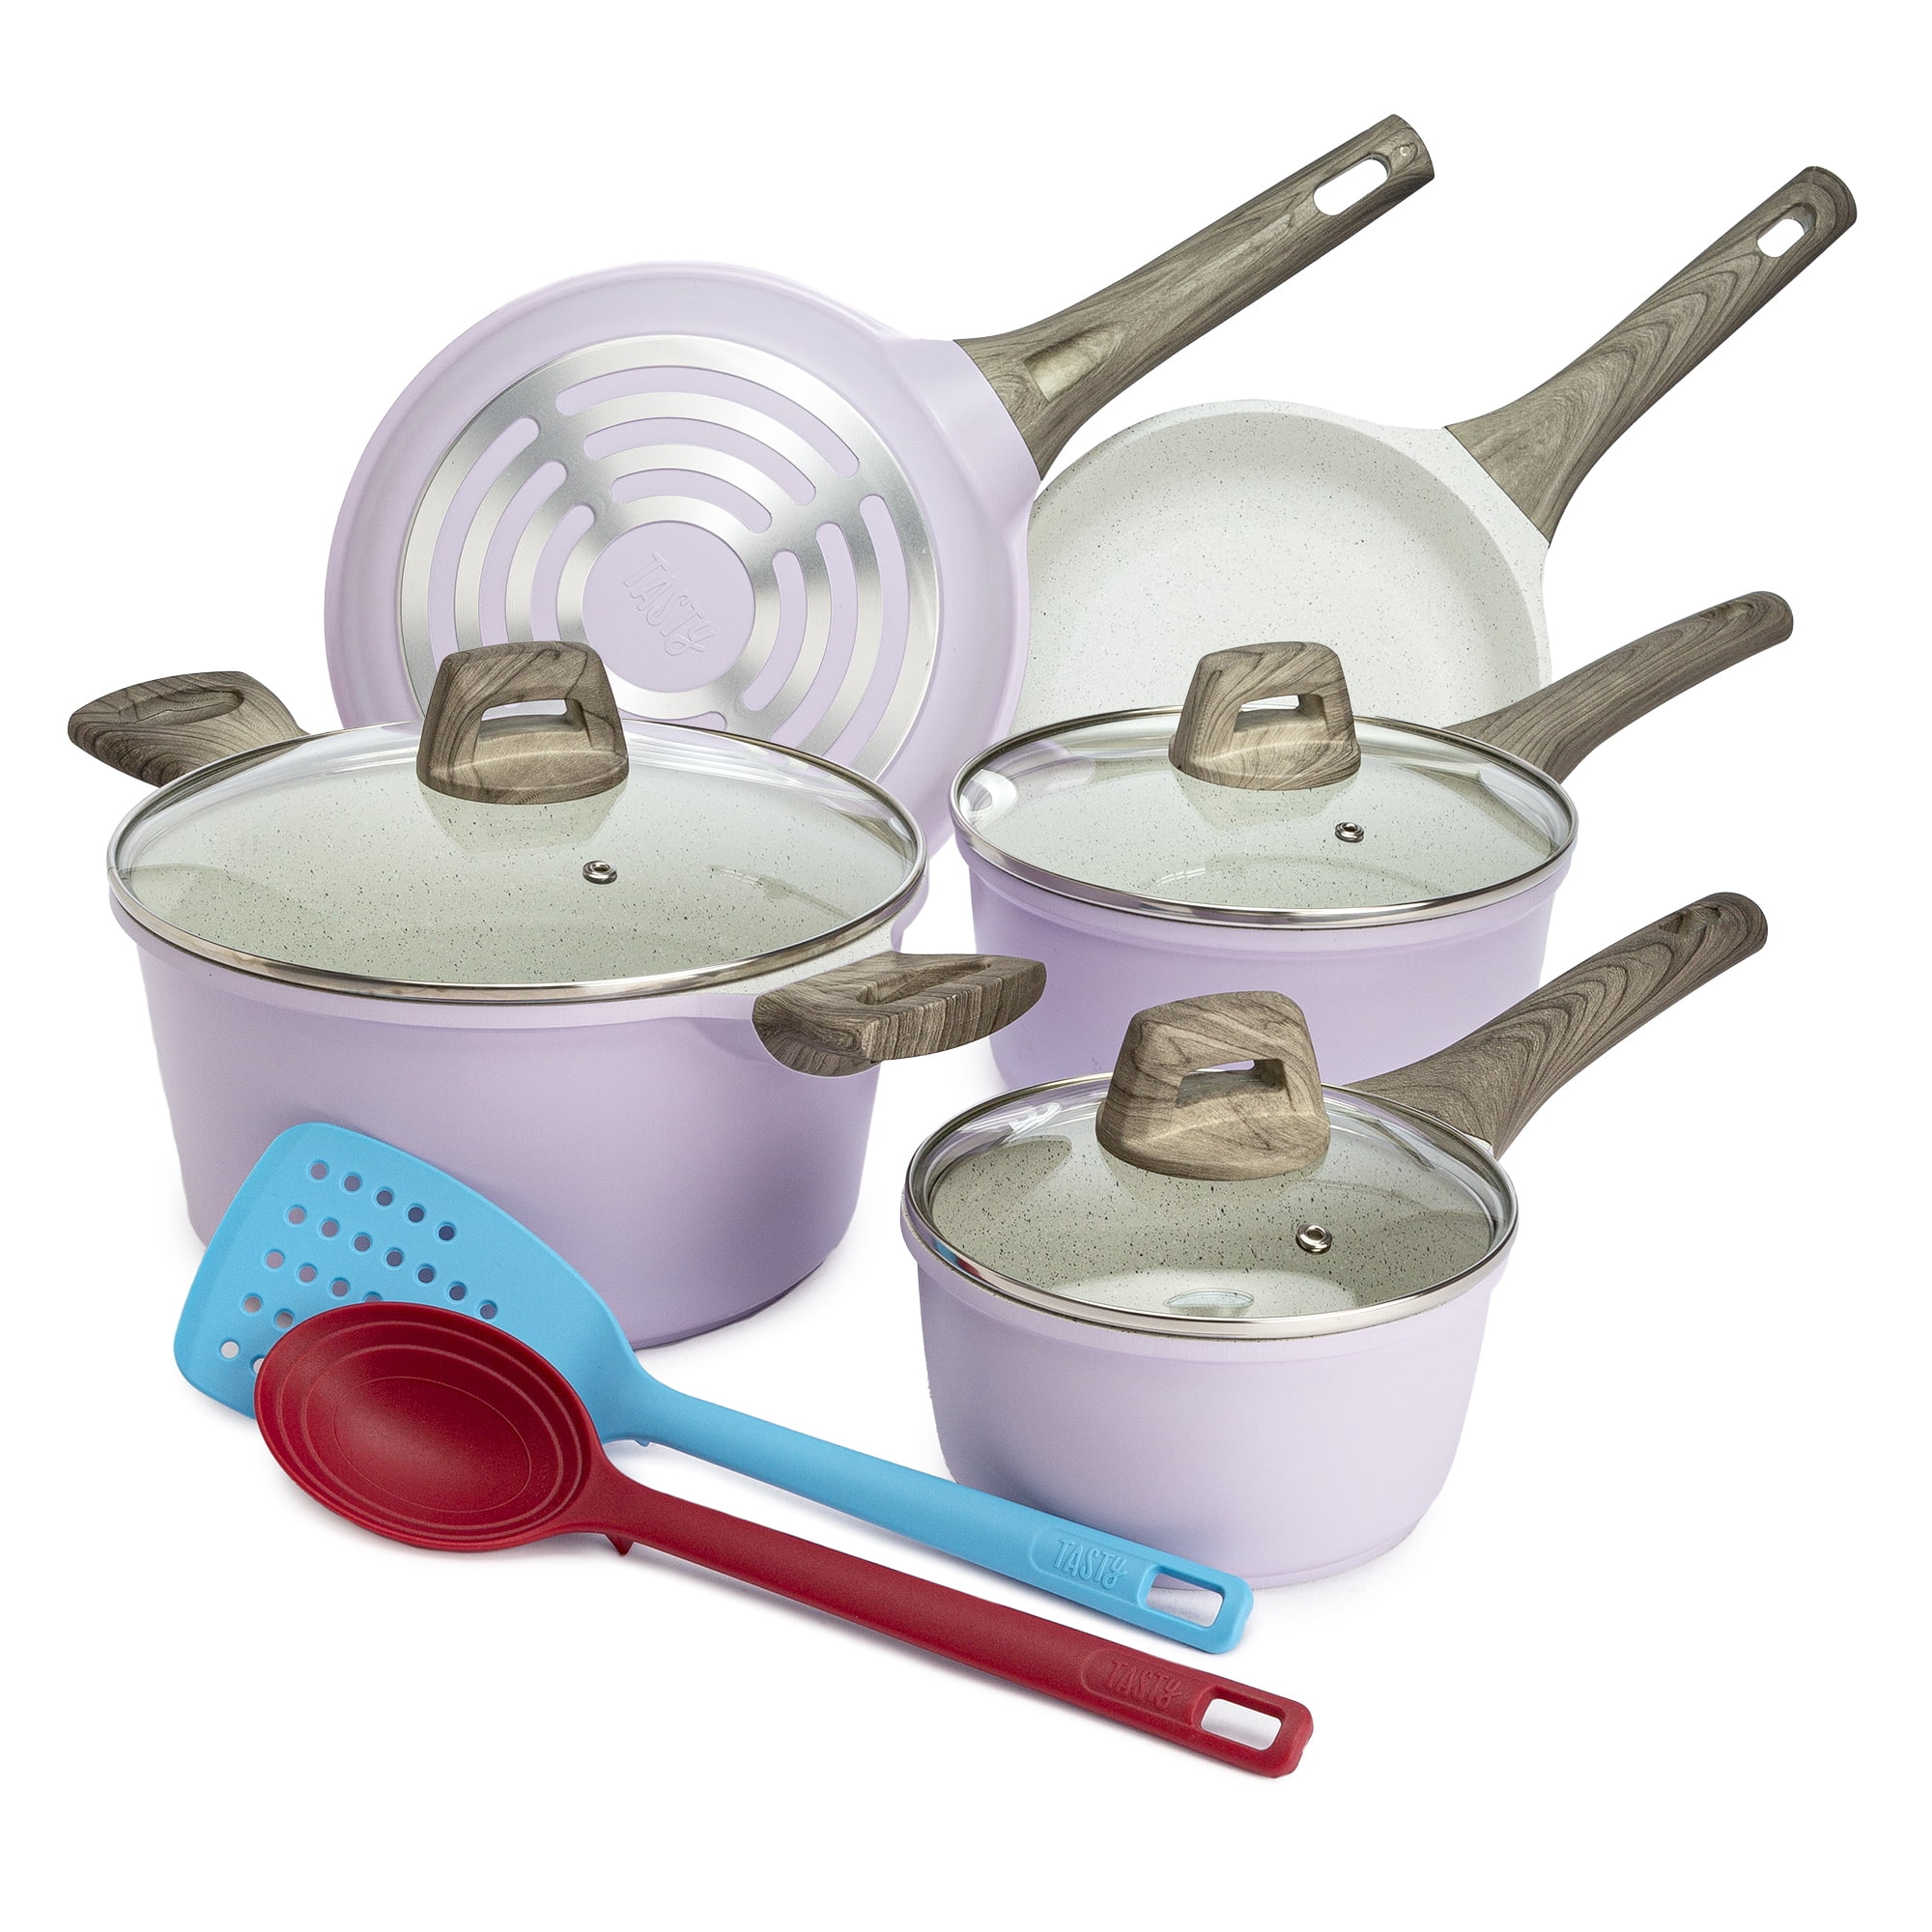  13 Piece Non Stick Pots and Pans Set with Lids, Kitchen  Kitchenware Cooking Pots & Pans Kits, Complete Cookware Set for  Kitchen,Dishwasher/Oven Safe, Non Toxic,Purple: Home & Kitchen